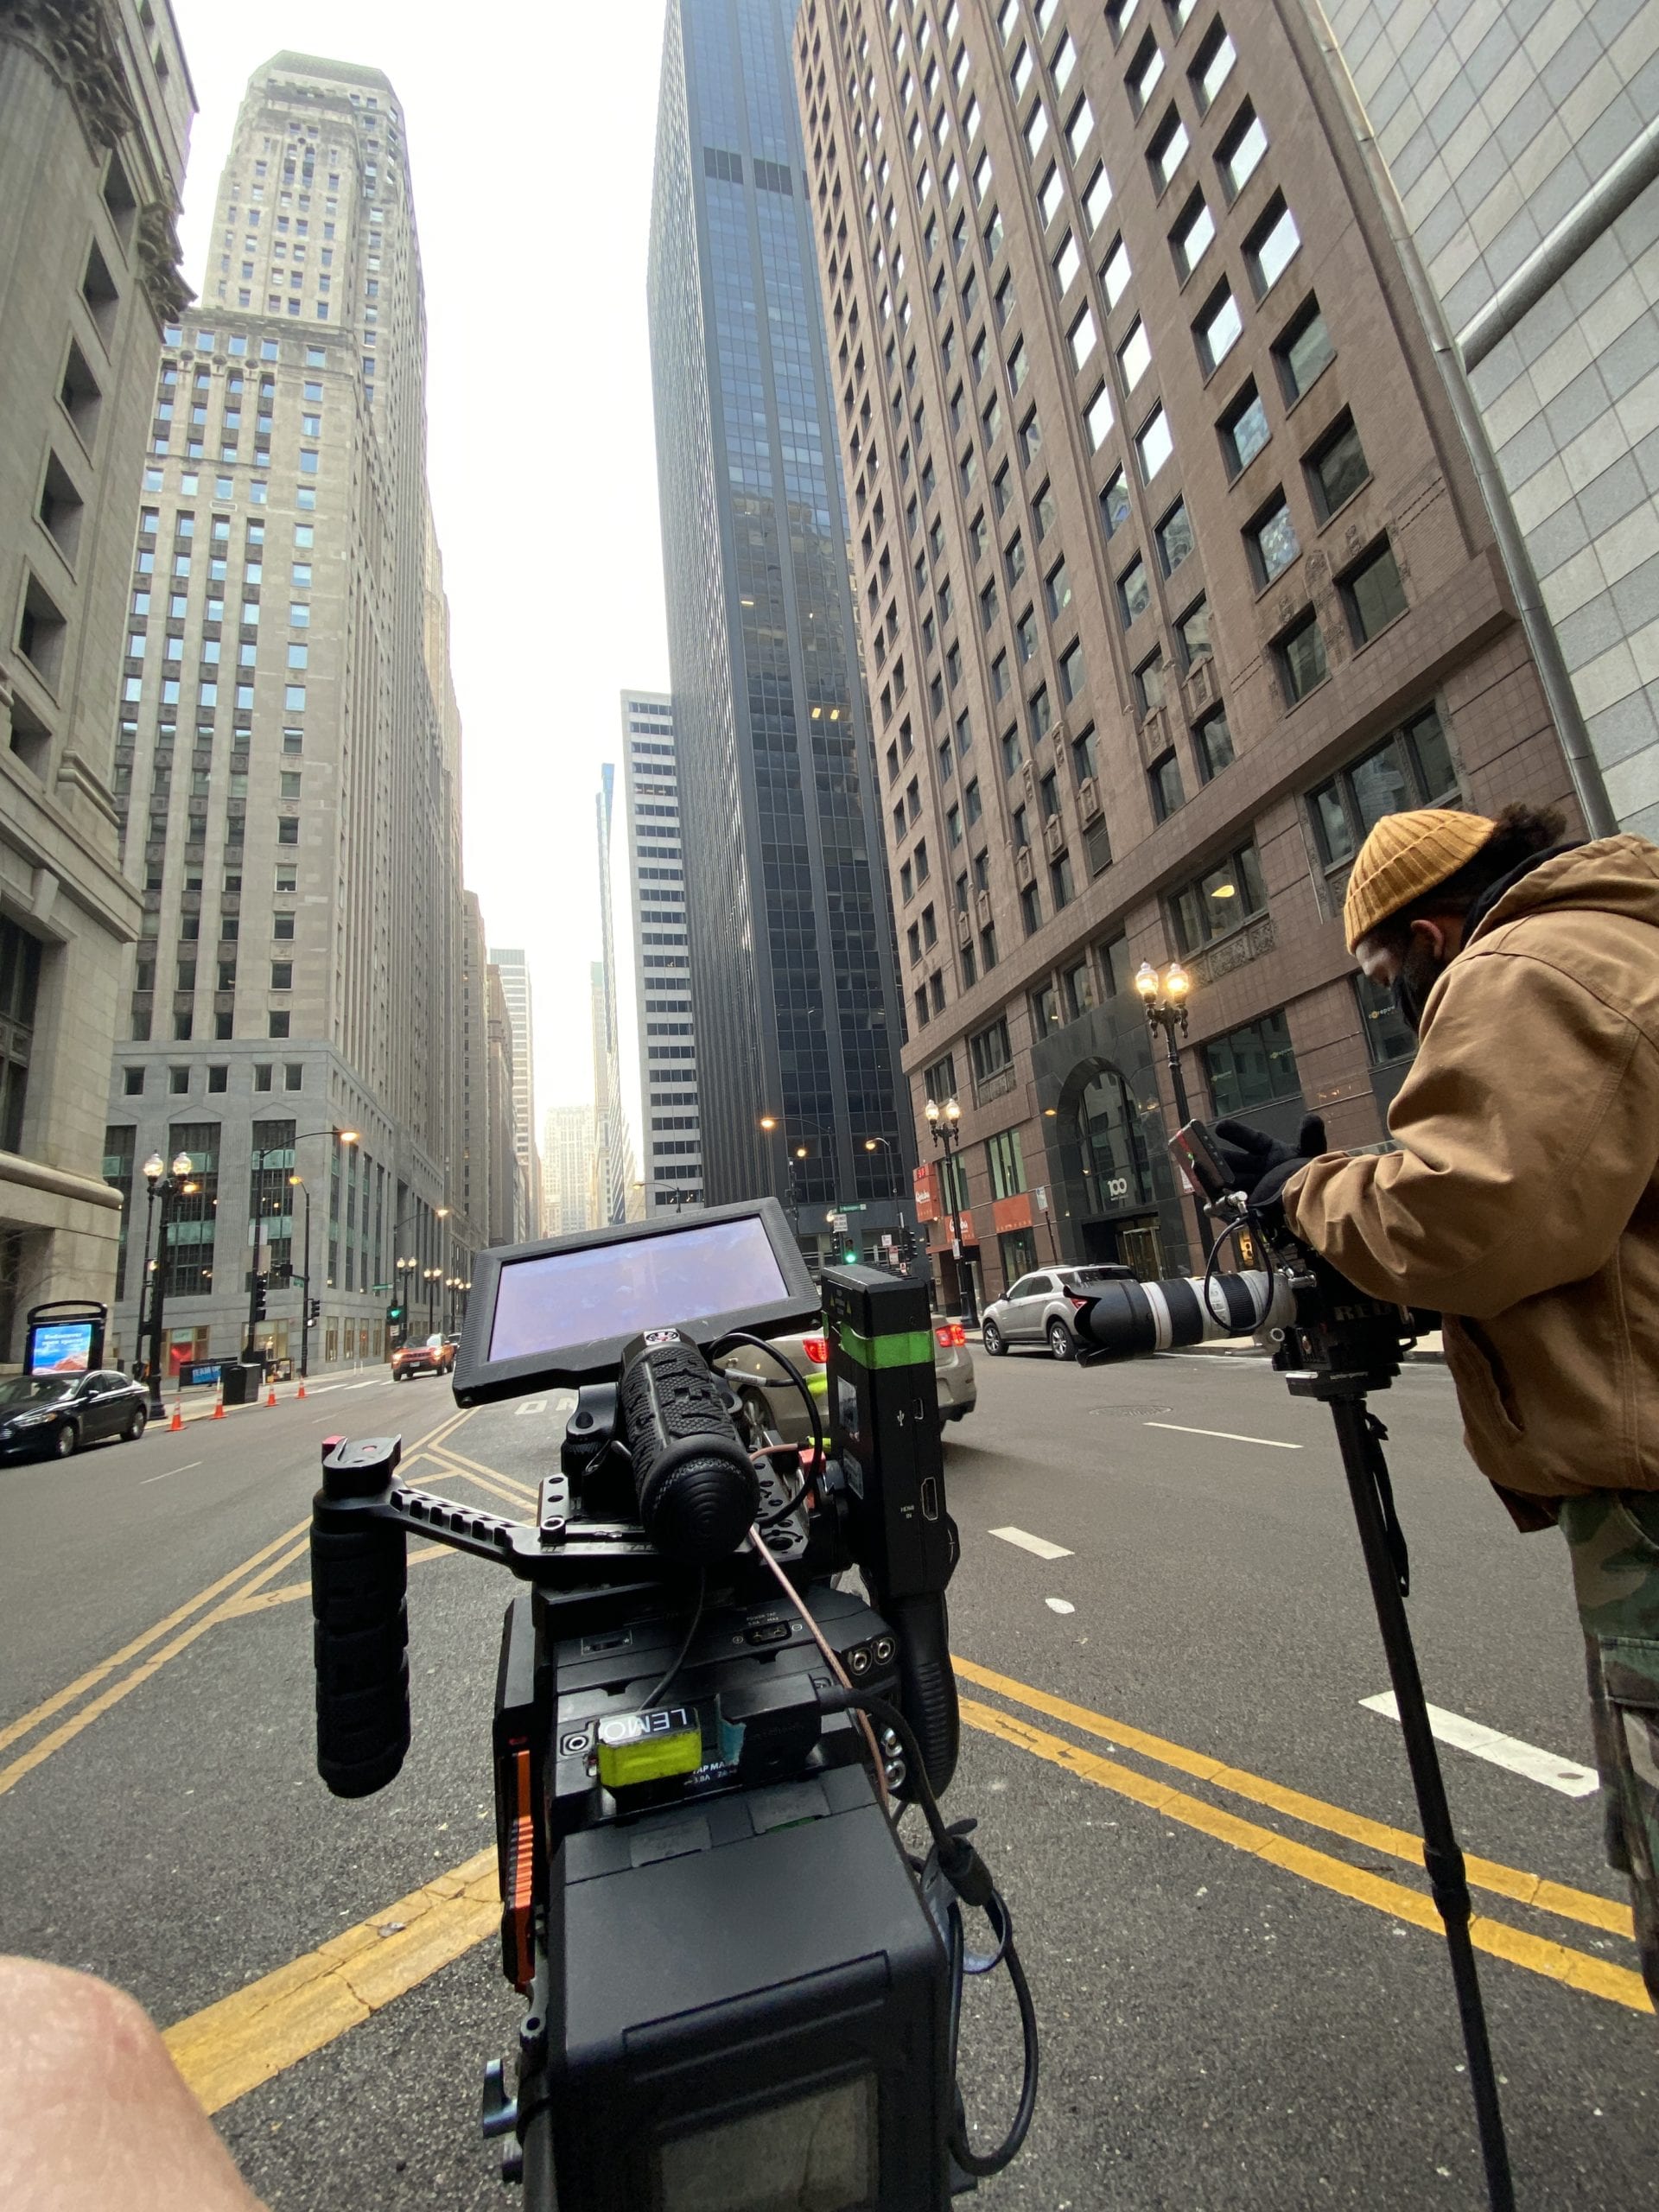 RED Camera being used on a street in a city with crew around it